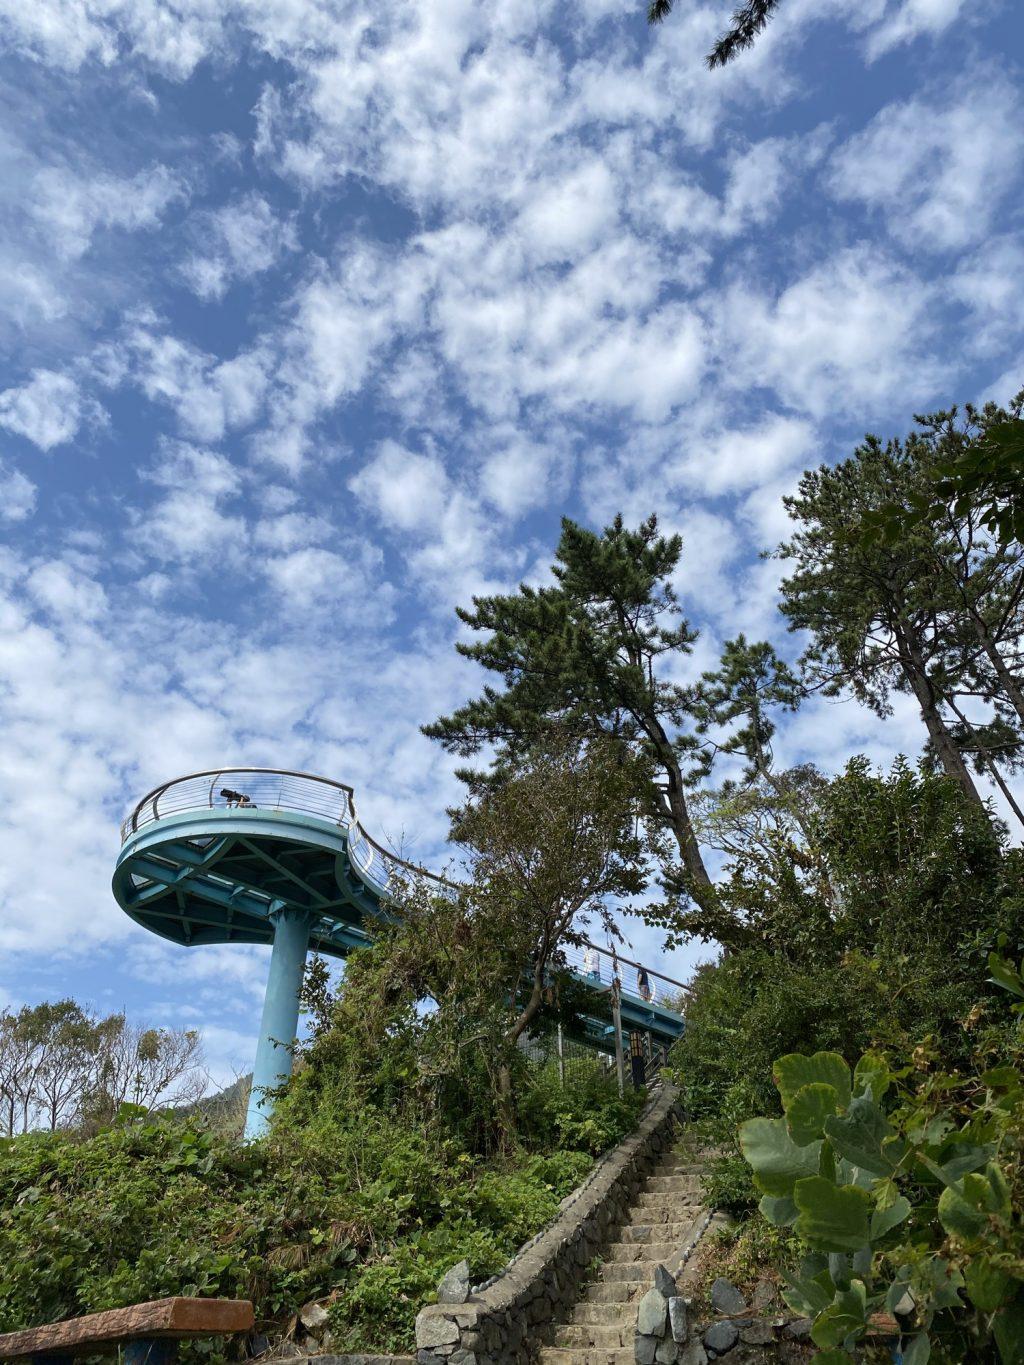 The Jeoryeong Coastal Walk provides hikers with a place to view the ocean and take pictures Oct. 4. The high skywalk against the beautiful sky and sparkling ocean provided a great view.